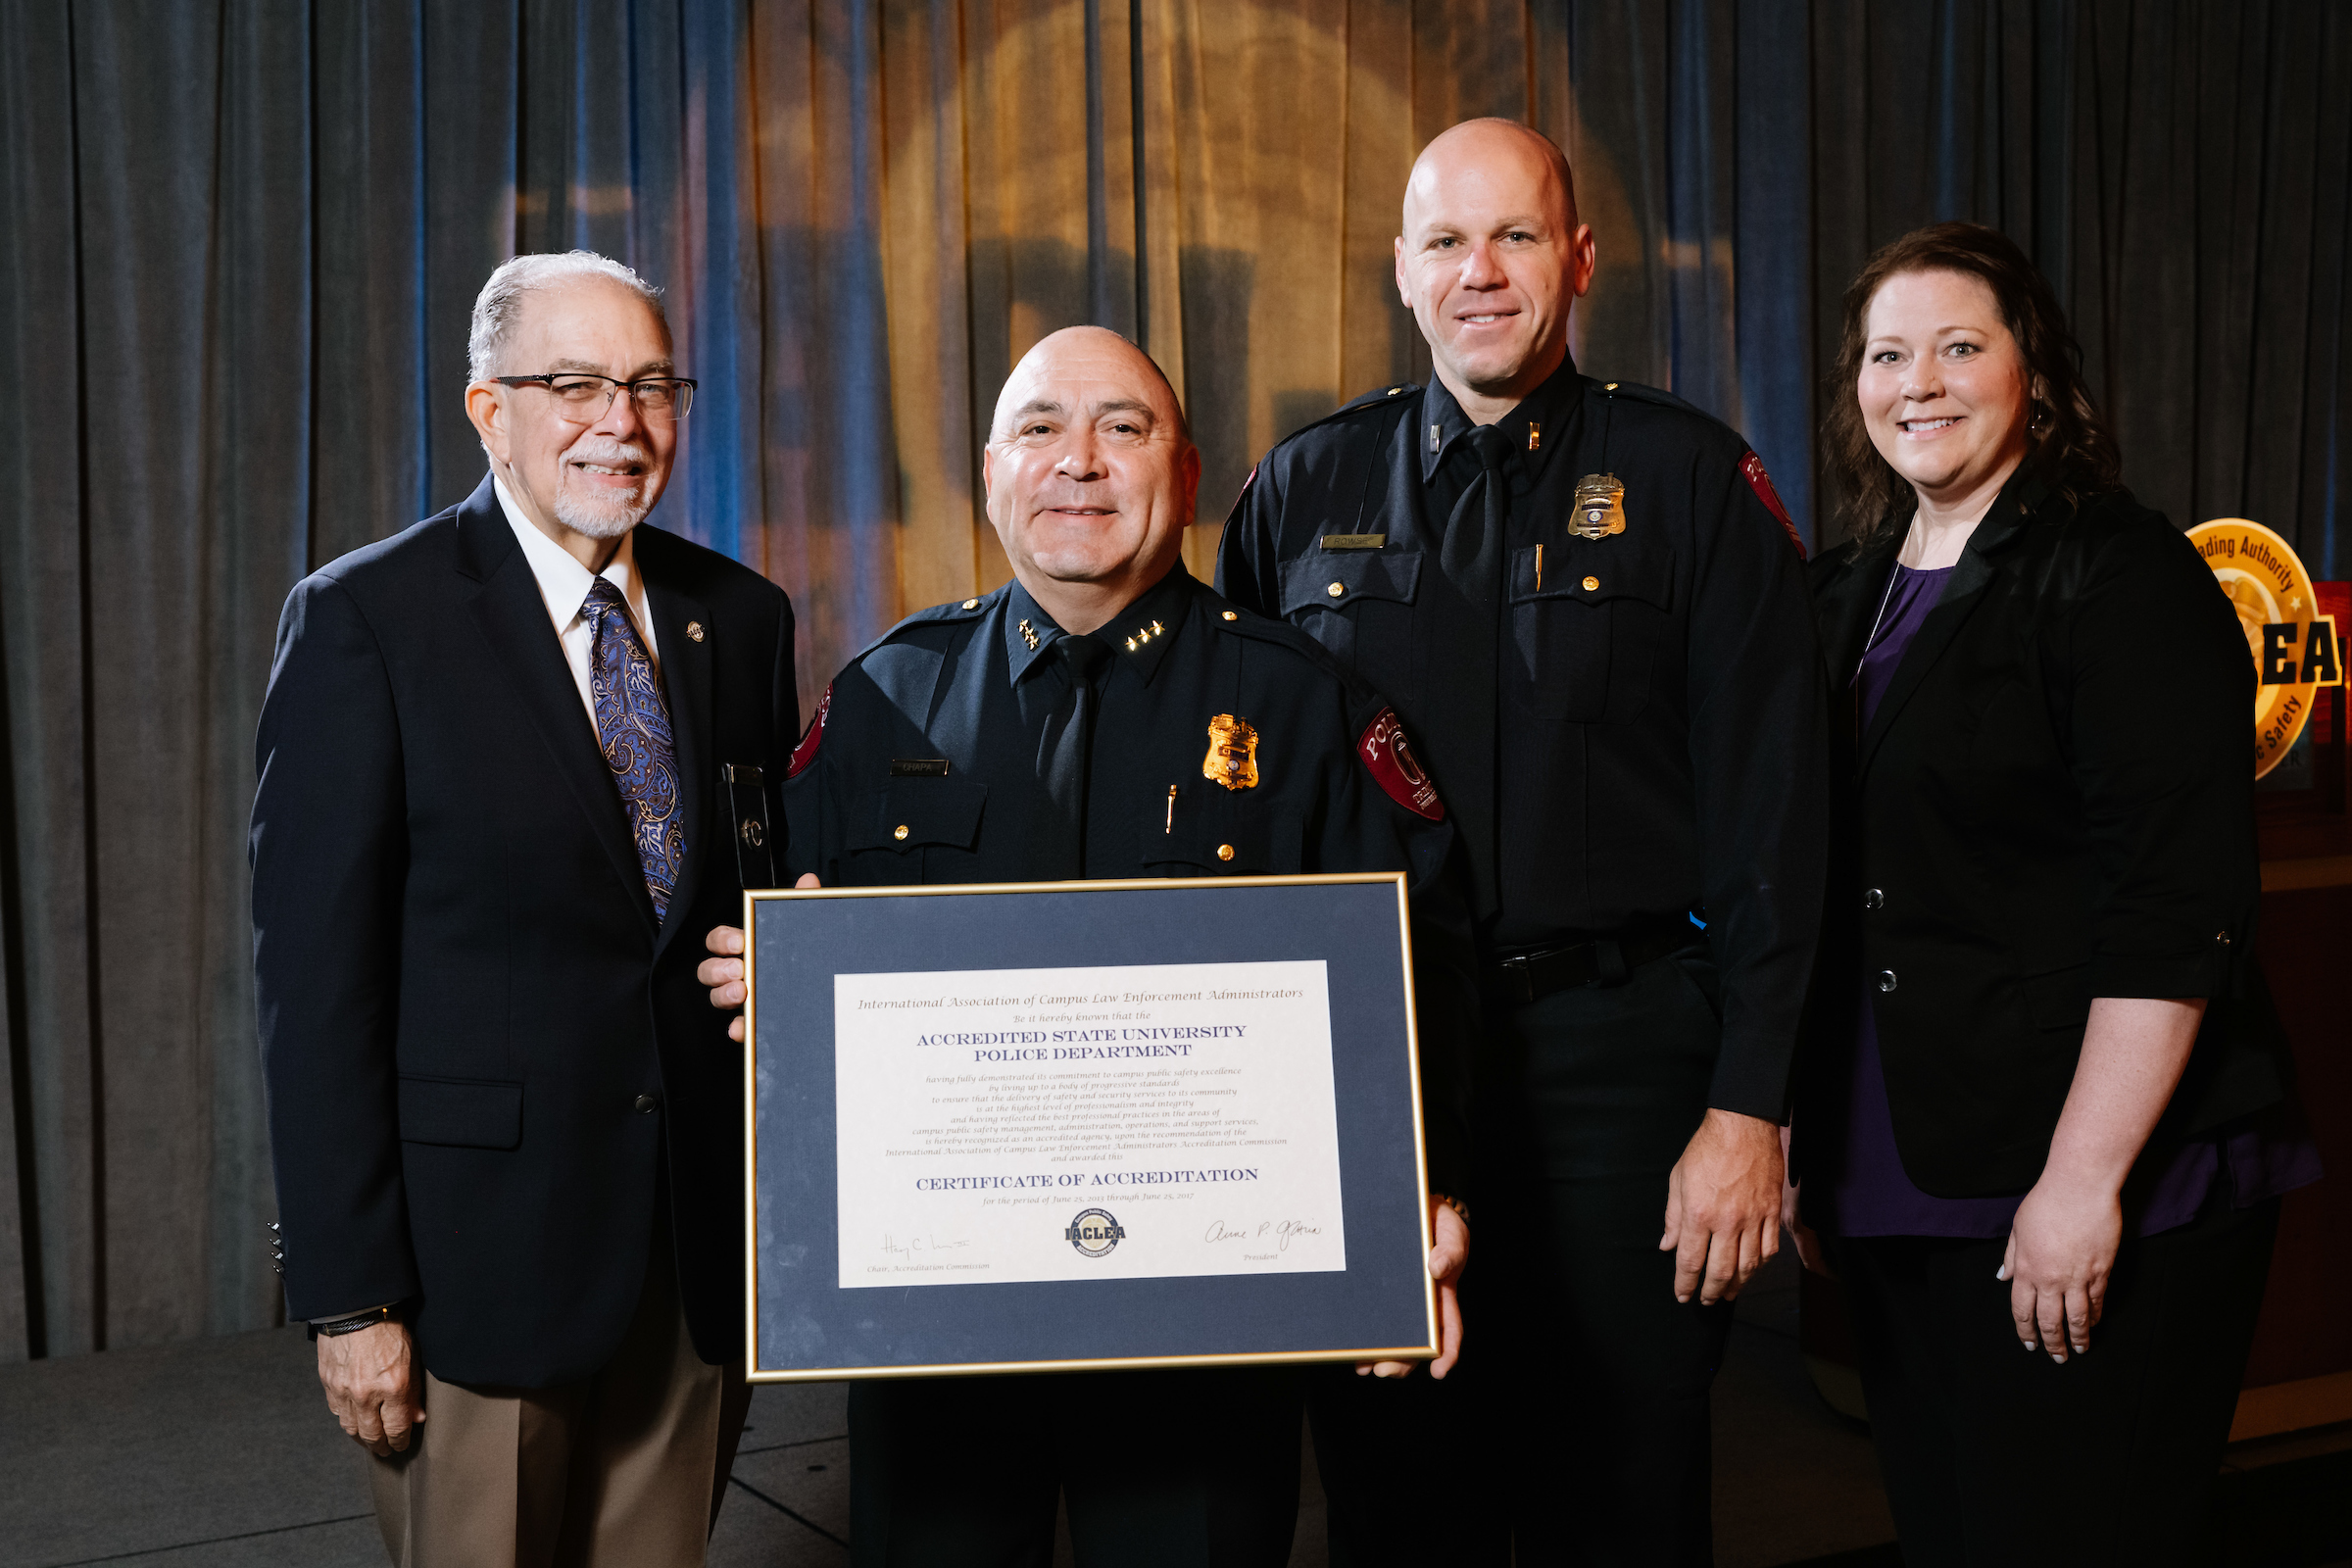 Chief Paul Chapa and Lt. John Rouse of Trinity University (Texas) Security and Safety Department receive recognition for achieving initial Accreditation during the 2019 Annual Conference & Exposition. © Mike Ritter